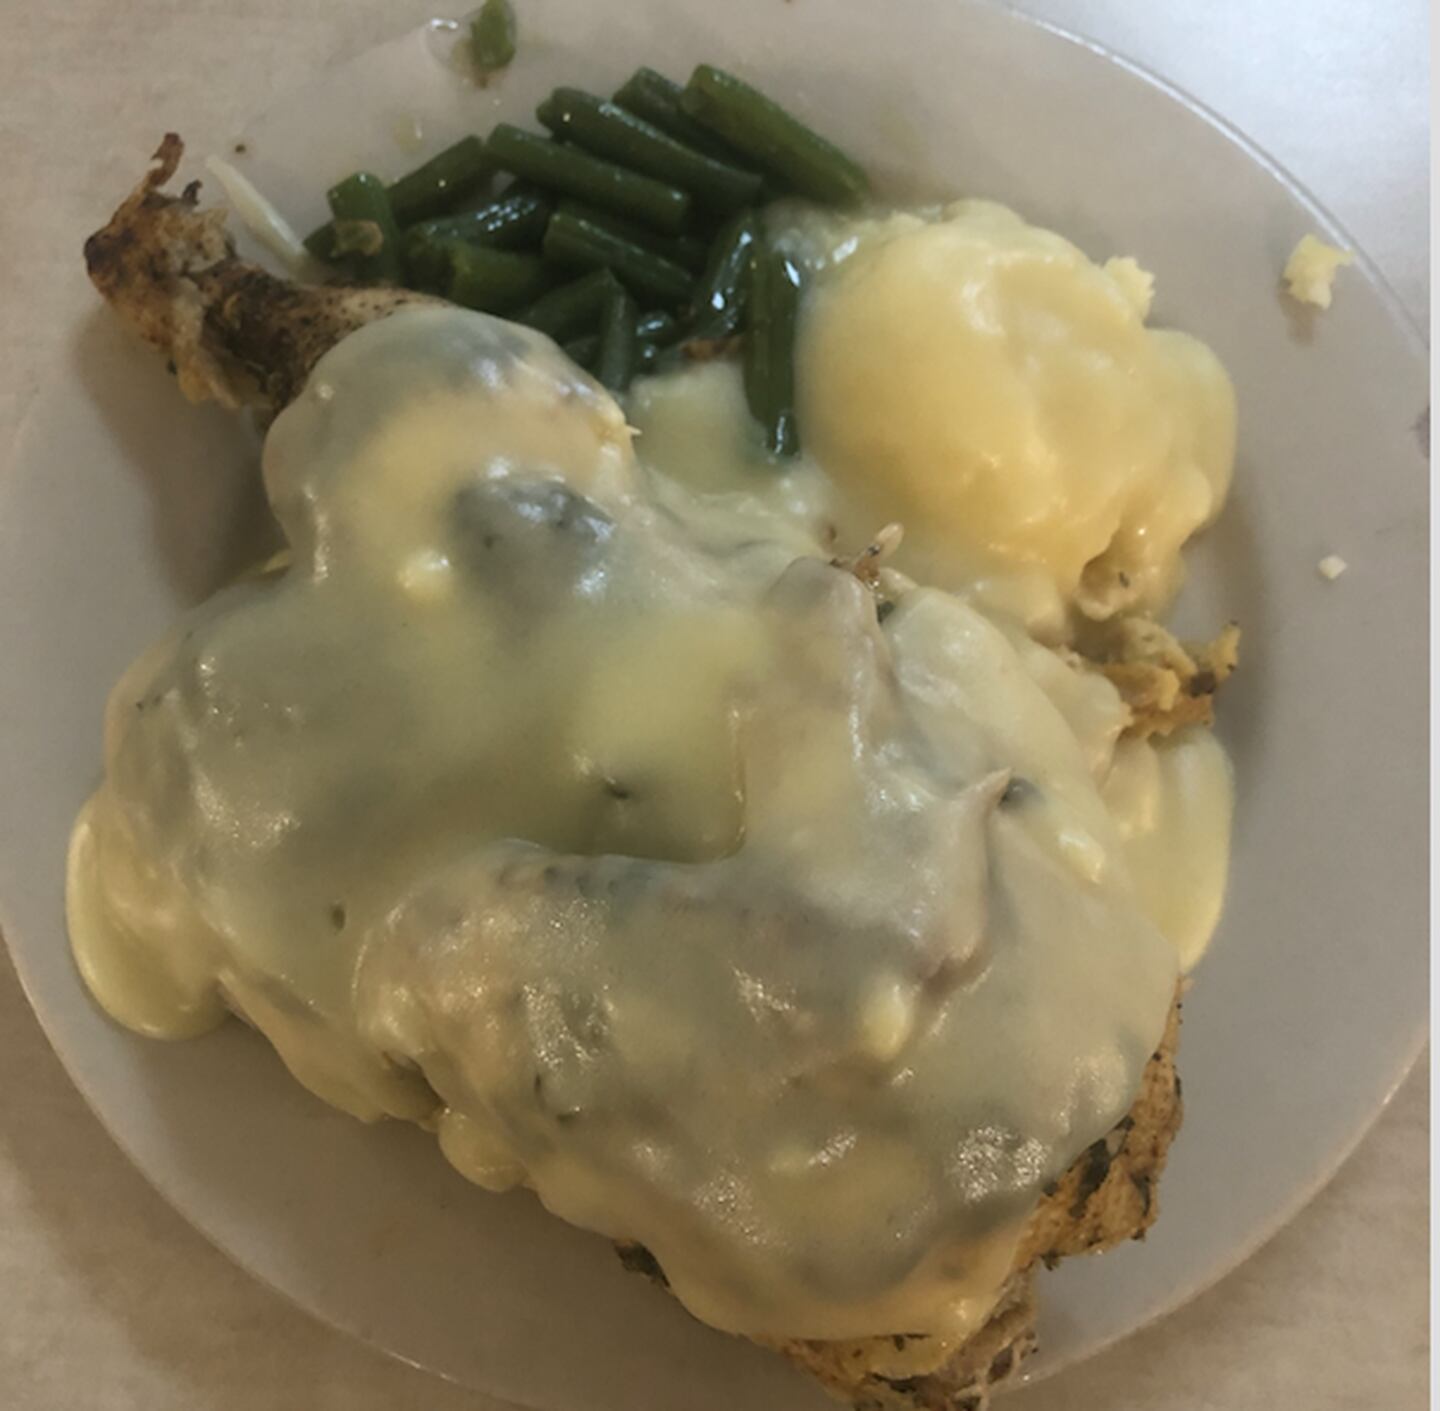 The Roasted Chicken special at Cindy's on 34 in Mendota fills your plate and comes with mashed potatoes and gravy, stuffing, veggie of the day and a salad,